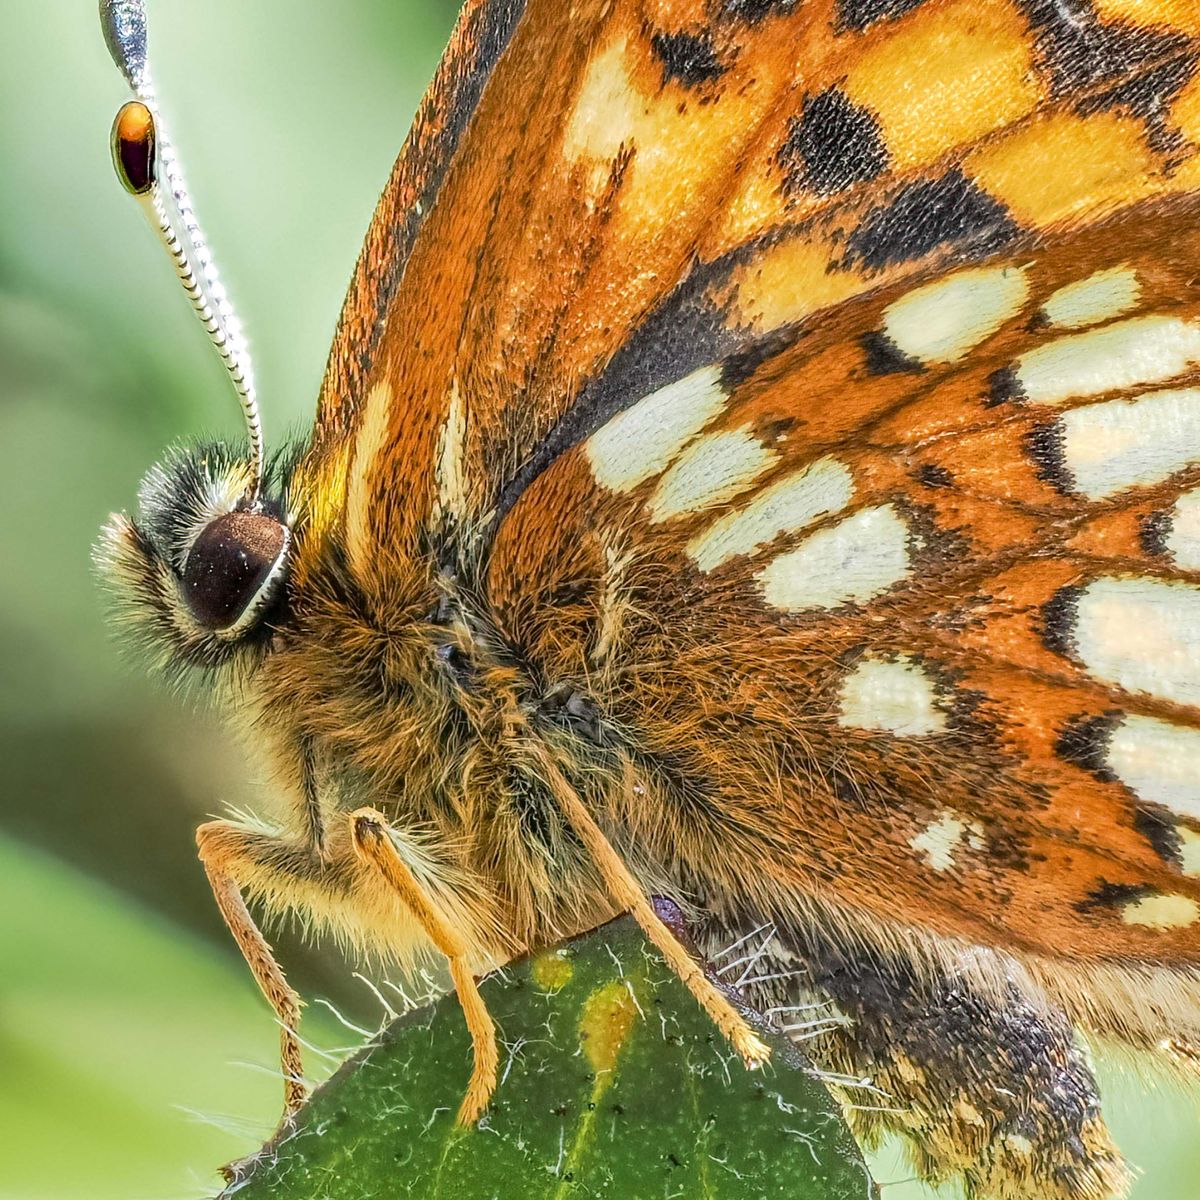 How (and why) to photograph butterflies